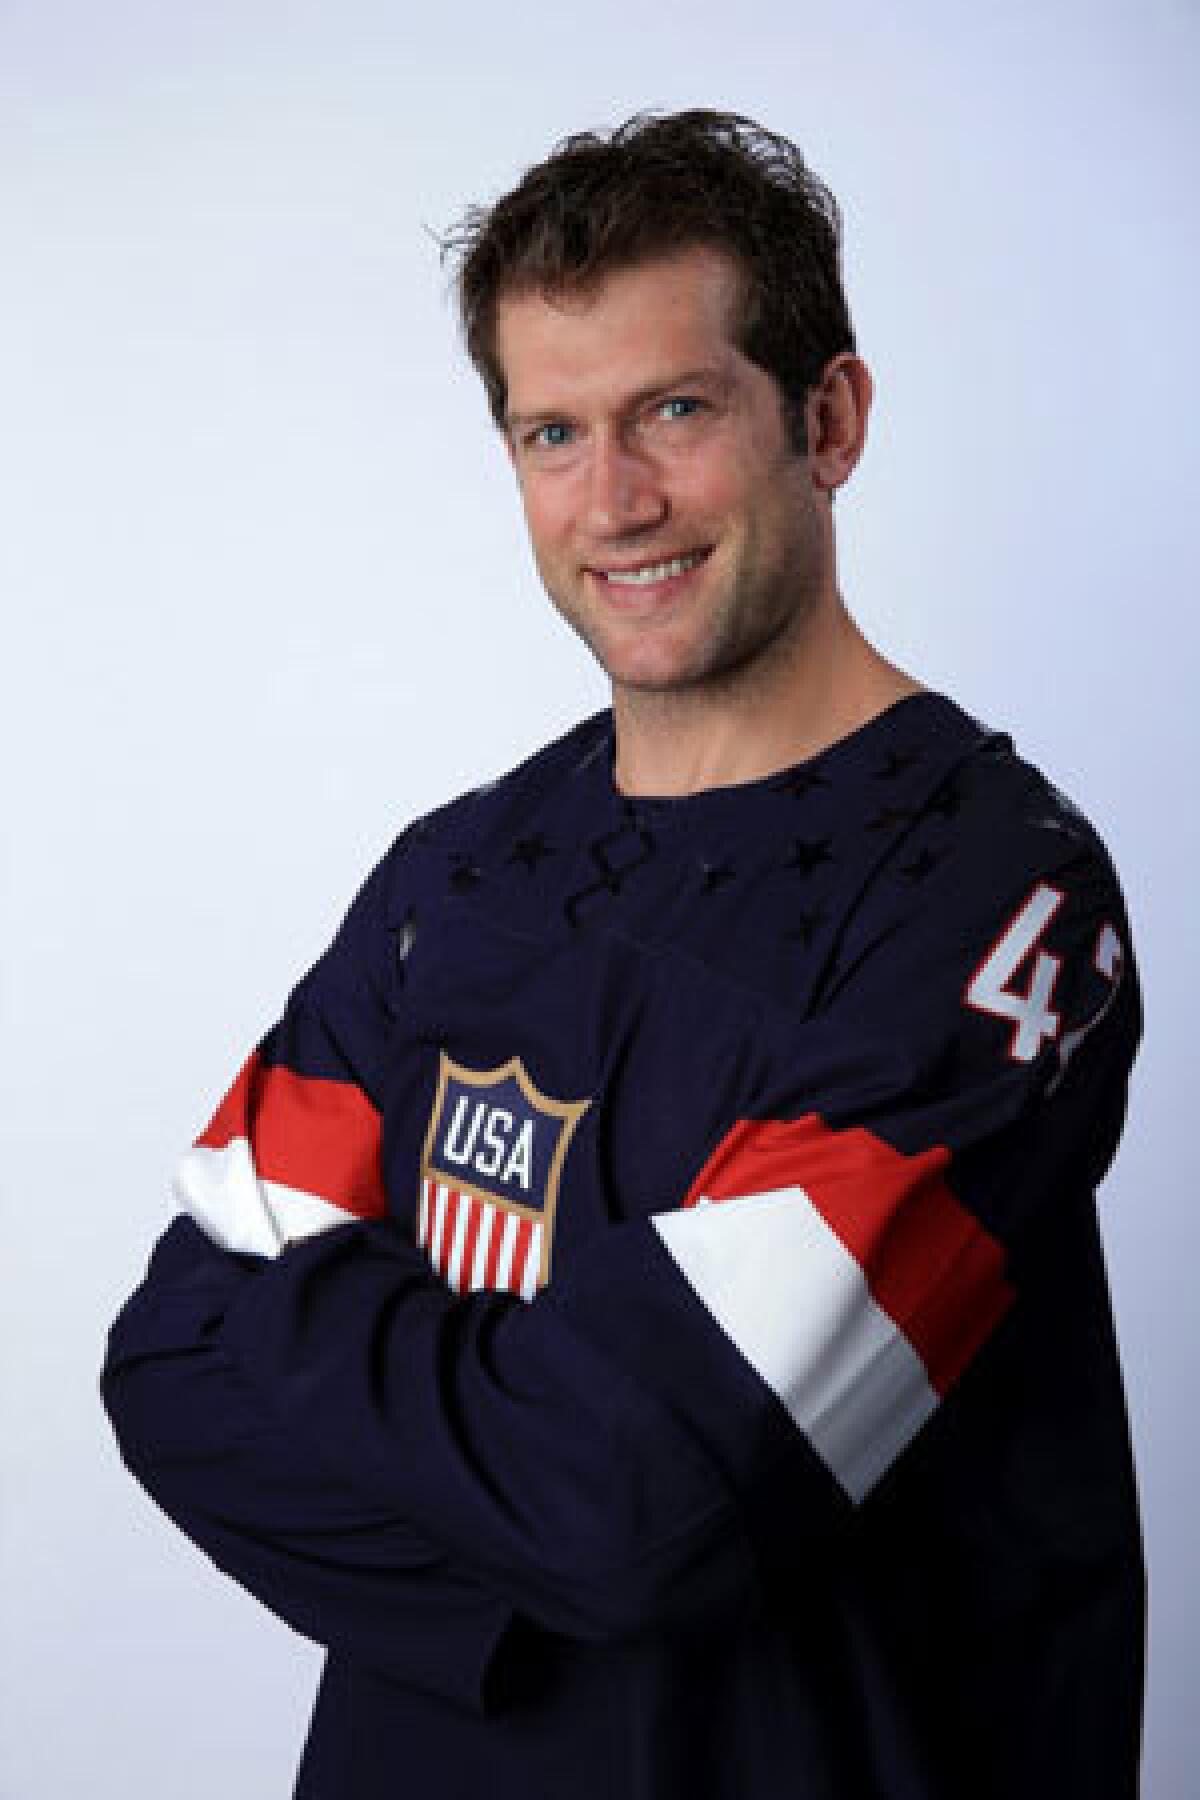 "There's a mutual respect where on a Friday I might be playing Dustin Brown and on Saturday, Zach Parise and Ryan Suter, and it will get a little nasty and bloody but afterwards we can shake hands," David Backes says of playing against prospective U.S. Olympic teammates.